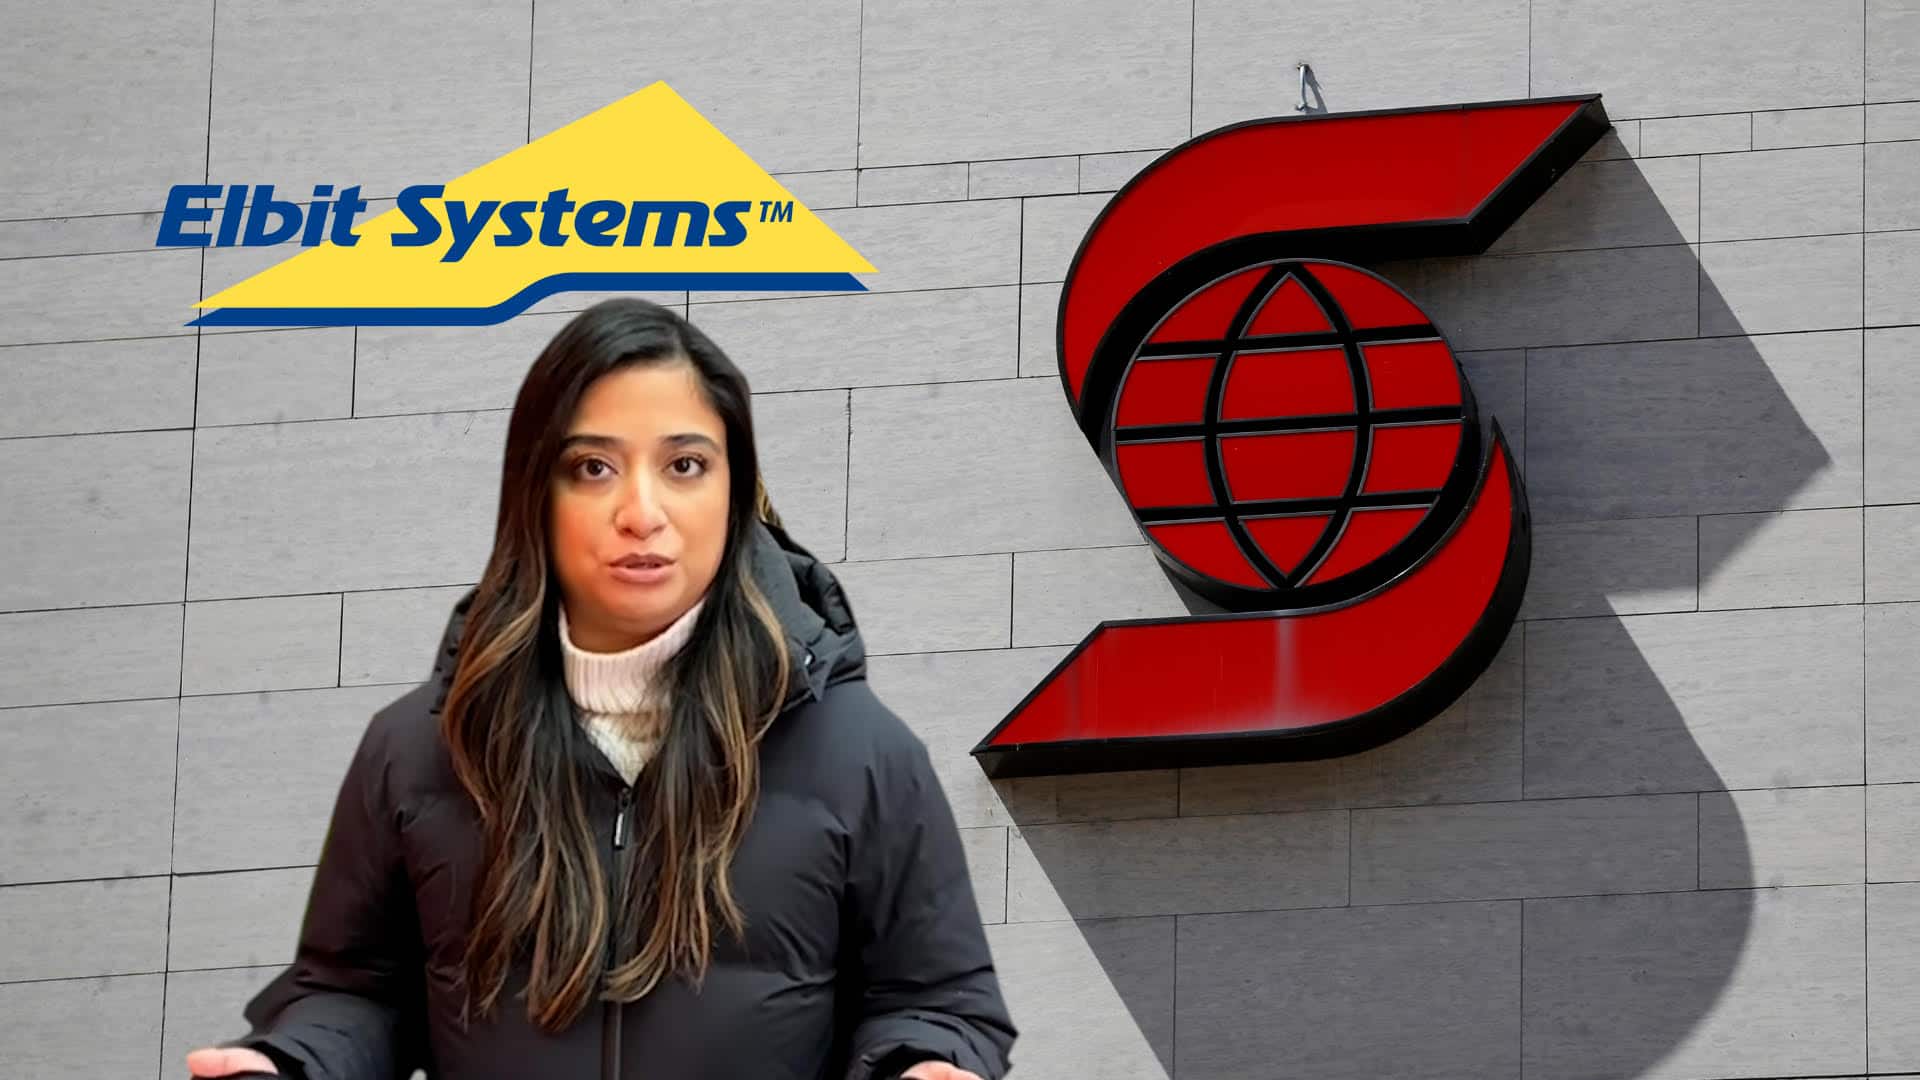 Why does Scotiabank have a $500M stake in an Israeli weapons maker?